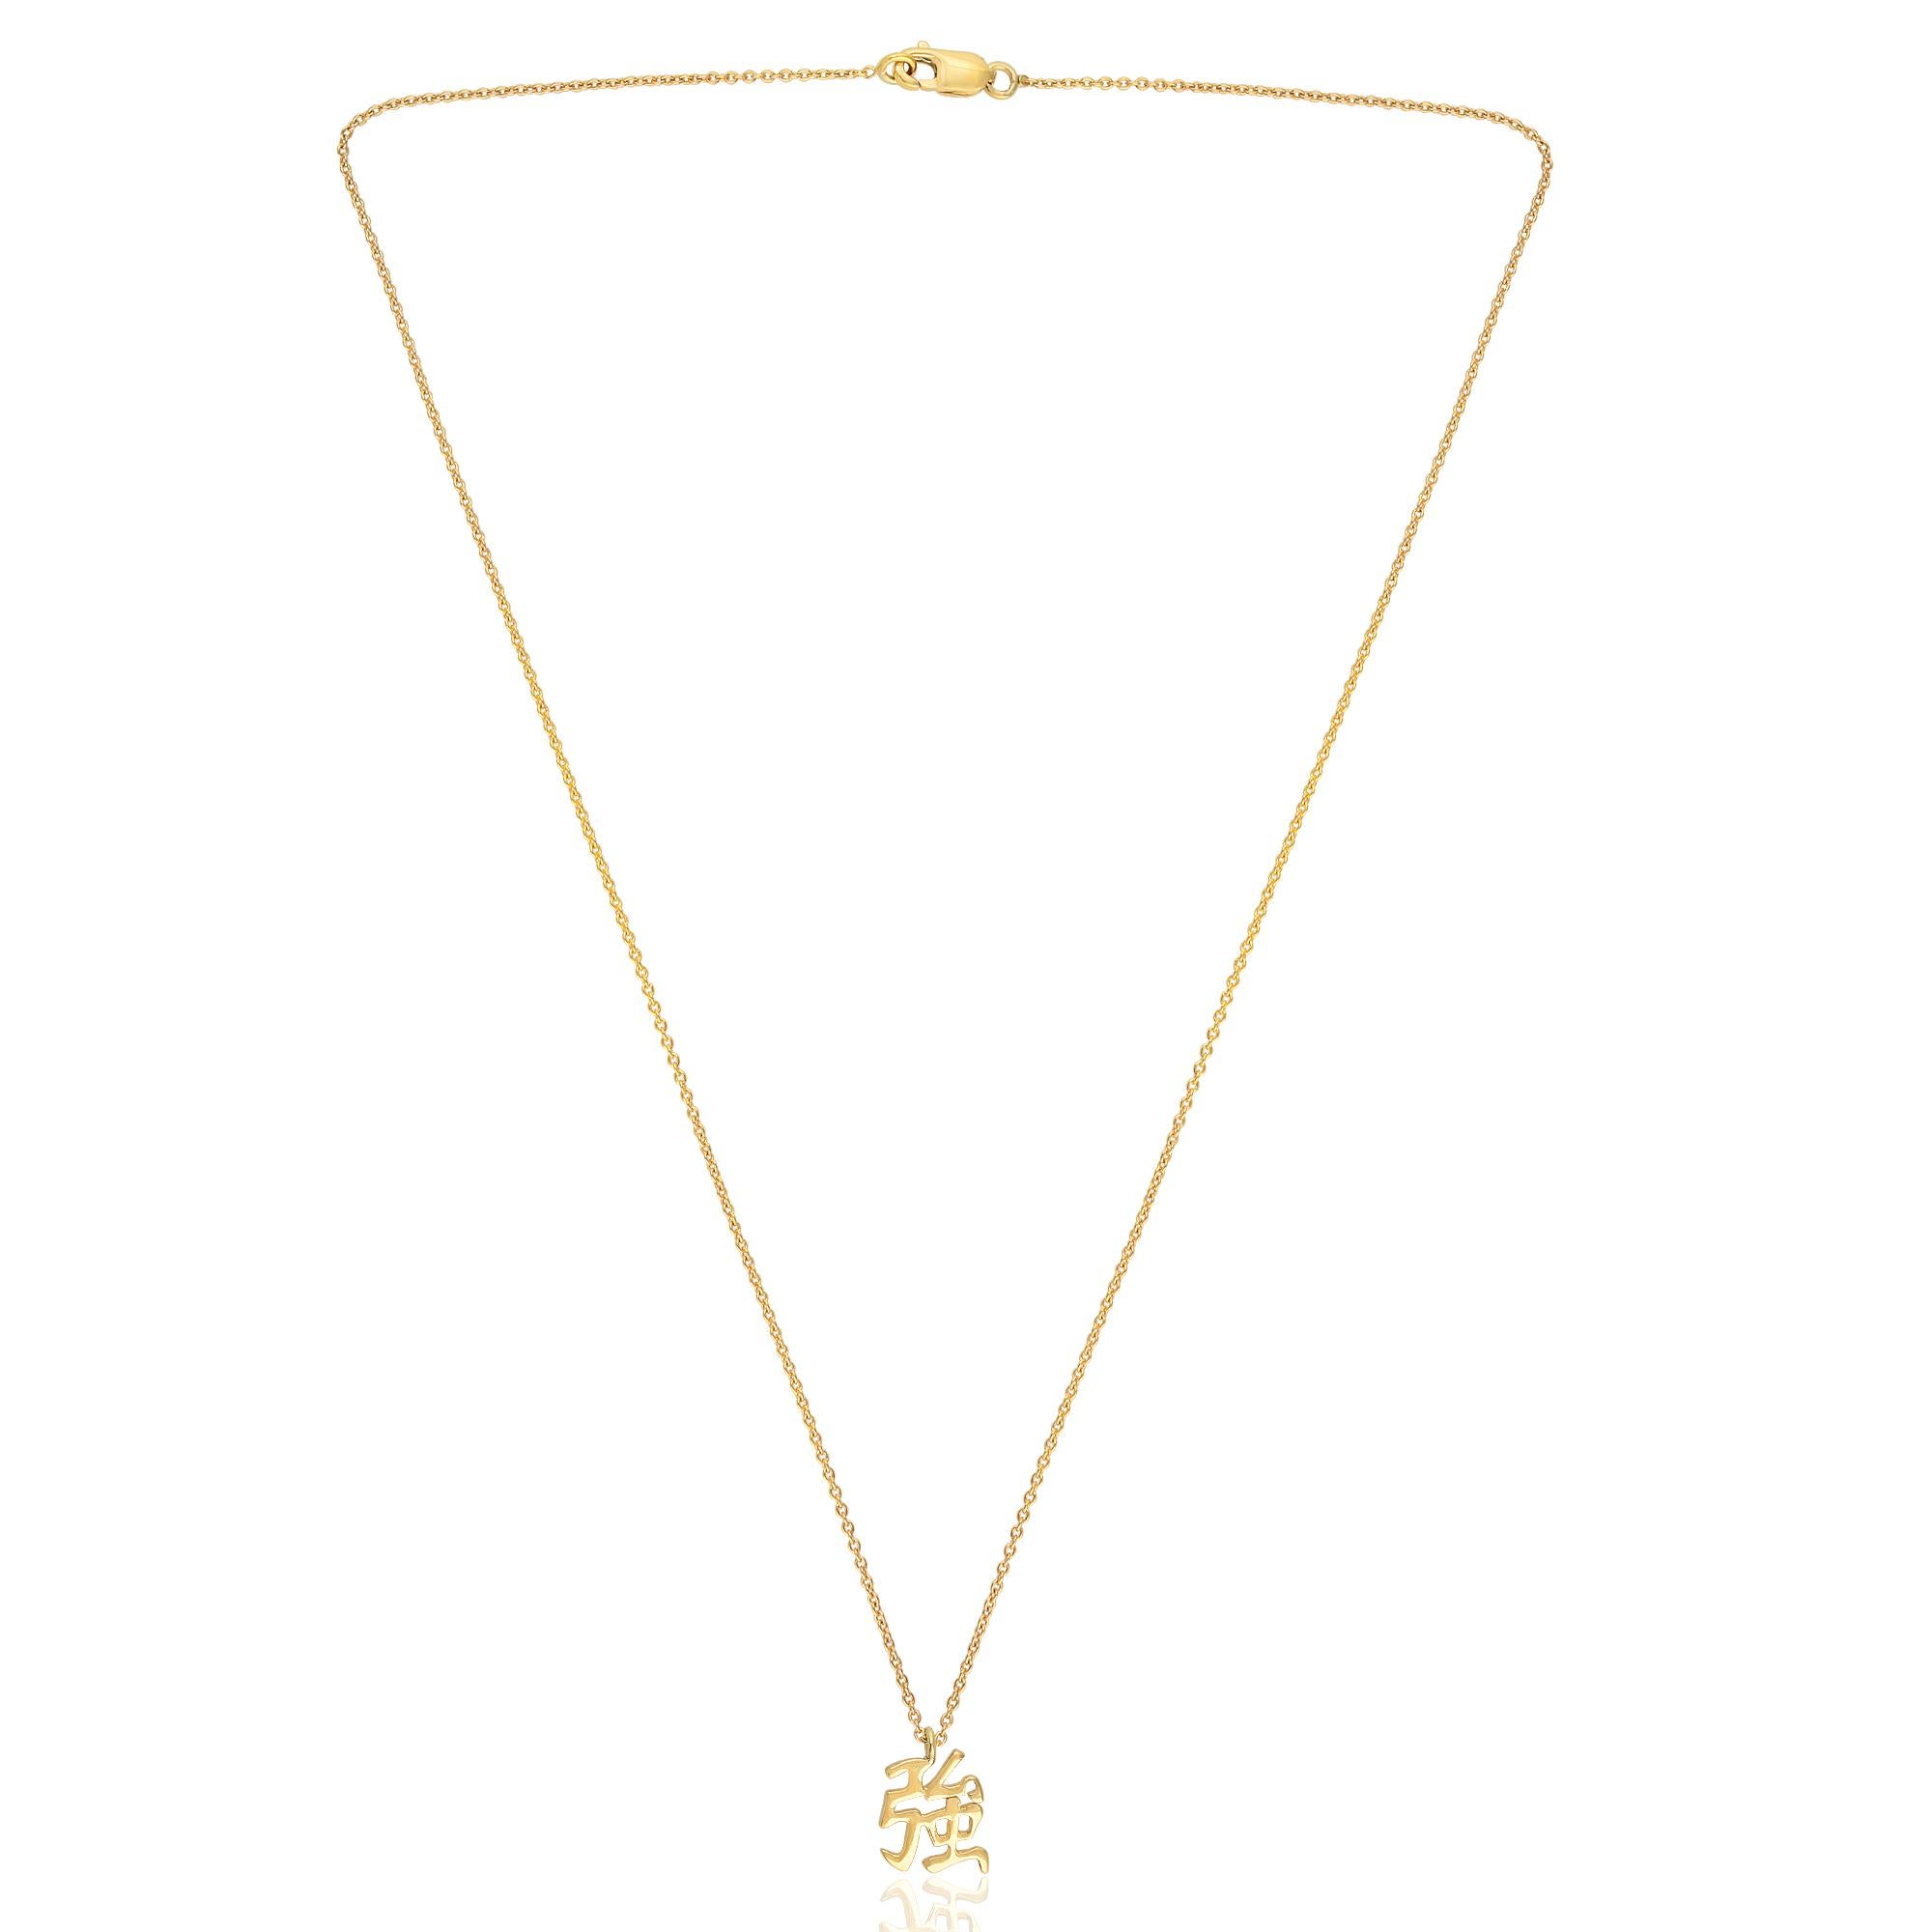 This necklace is not only a stunning accessory but also a powerful symbol of personal empowerment and resilience. It serves as a reminder to tap into our inner strength, embrace challenges, and emerge stronger.

Item Code :- SEPD-3076
Gross Weight